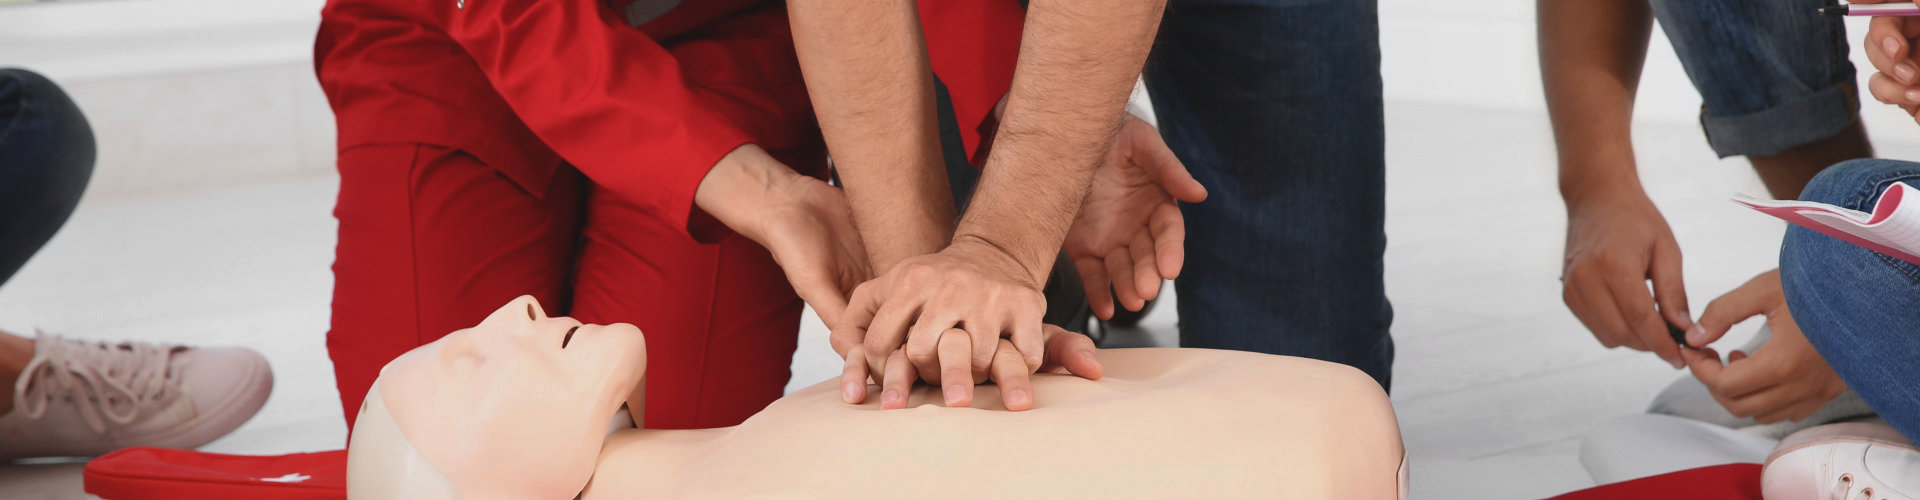 students performing cpr